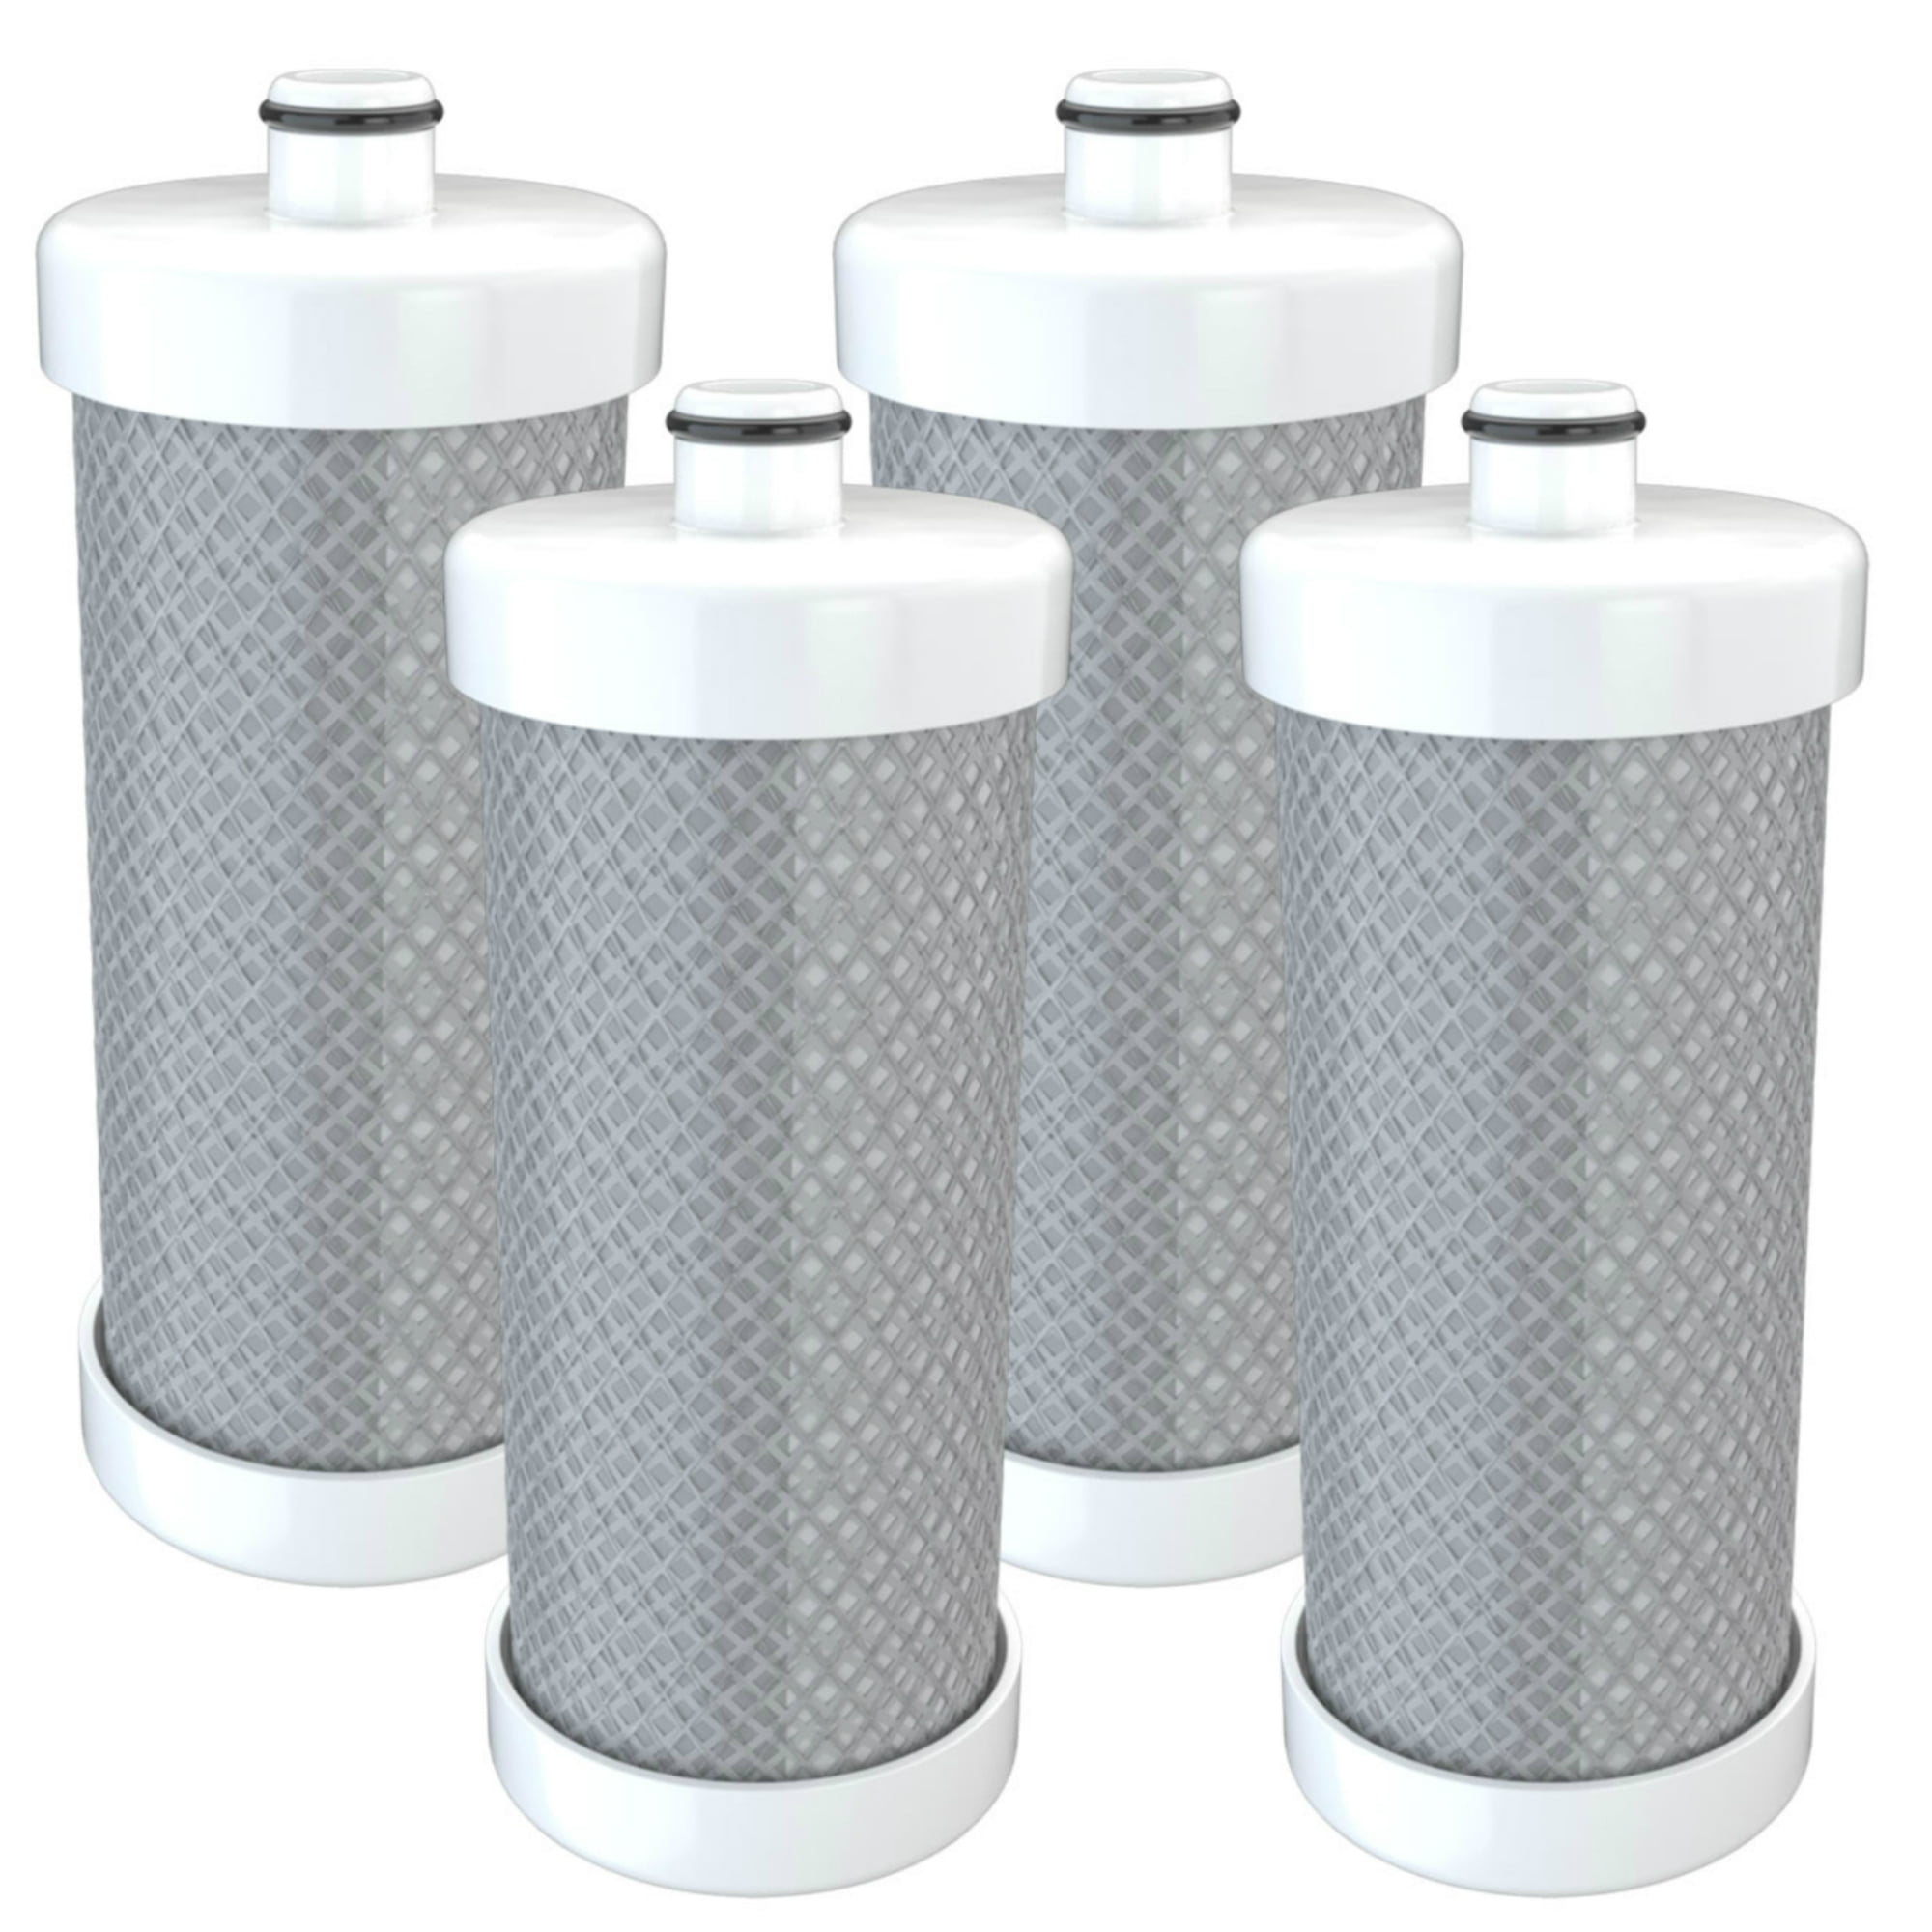 3 Pack Replacement Water Filter for Frigidaire 240389101 Refrigerators 